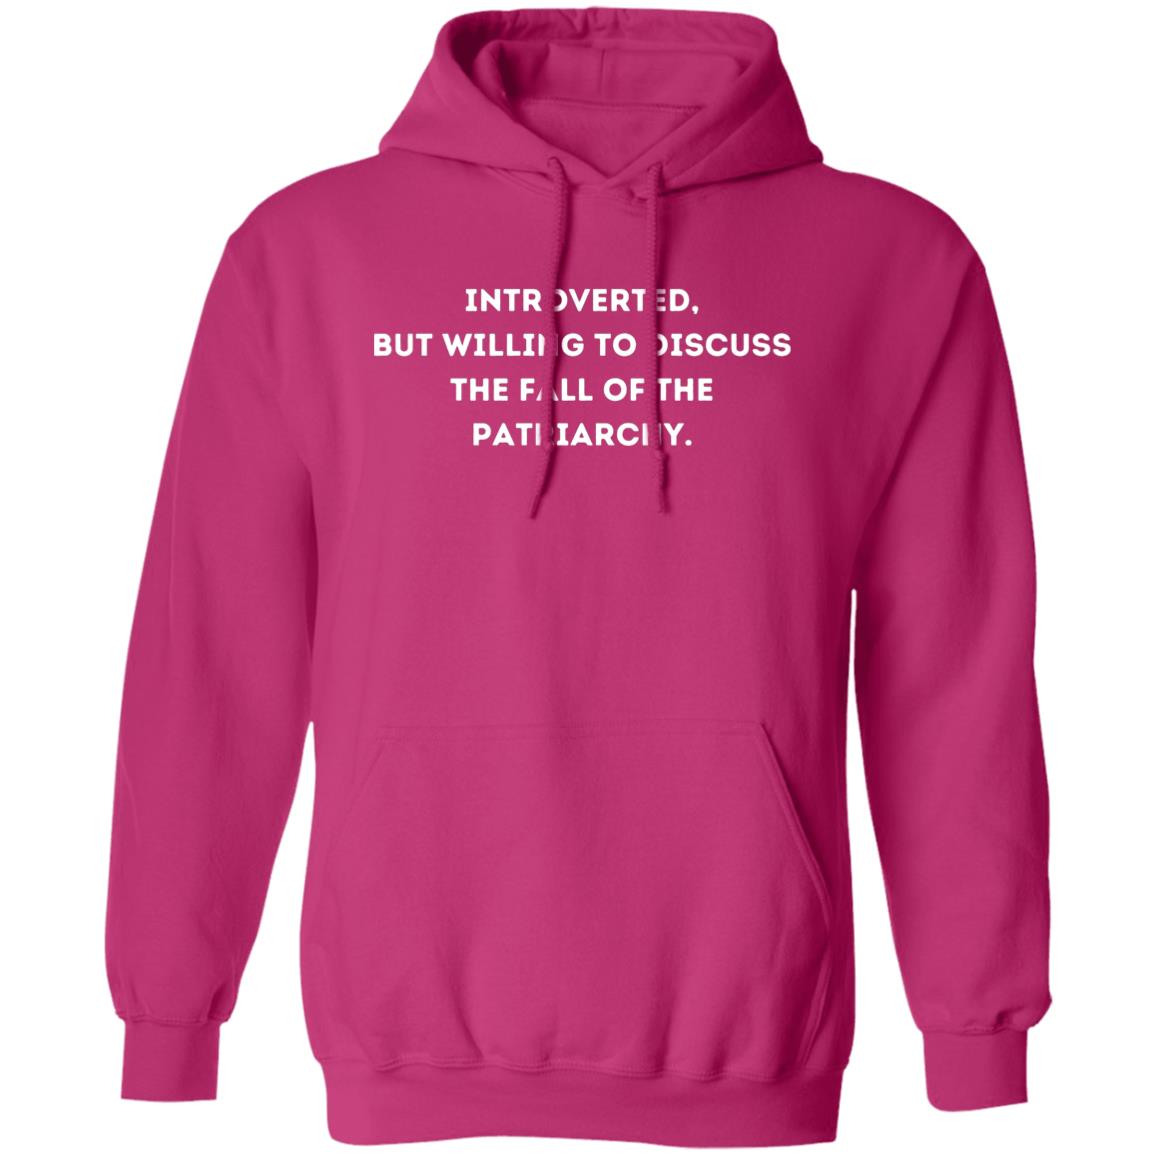 Introverted, but willing to discuss the fall of the patriarchy. Hoodie